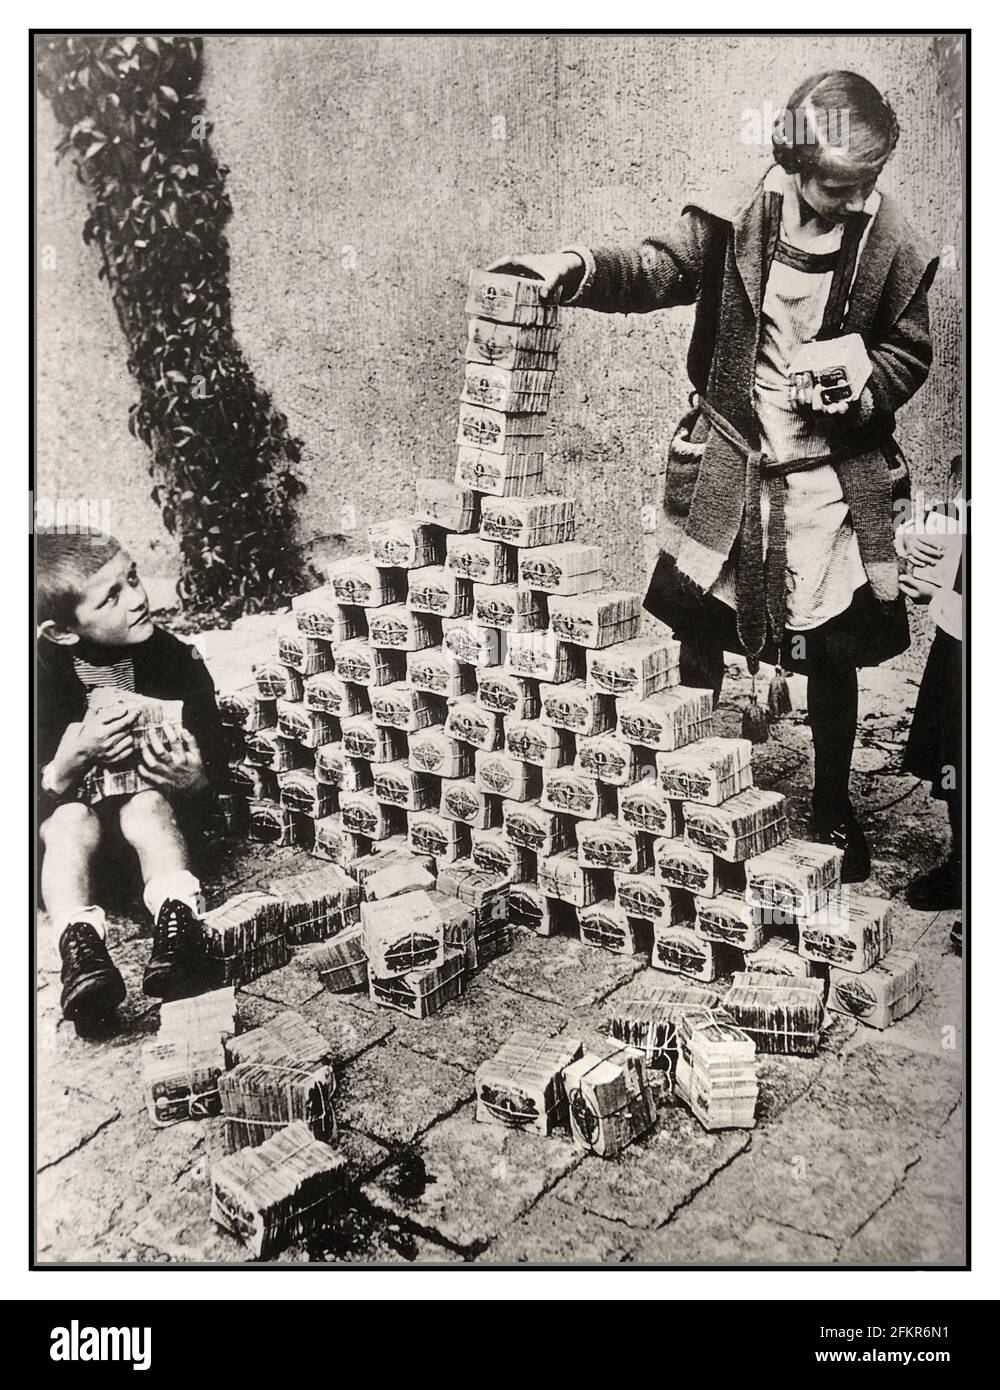 GERMANY WEIMAR INFLATION 1920’s Archive Hyperinflation Germany, children using banknotes as toys, Germany, 1920’s. Hyperinflation affected the German Papiermark, the currency of the Weimar Republic, between 1921 and 1923, primarily in 1923. It caused considerable internal political instability in the country, the occupation of the Ruhr by France and Belgium as well as misery for the general populace. Printing more money is exactly what Weimar Germany did in 1922. The hyperinflation led to the collapse of the economy. Stock Photo